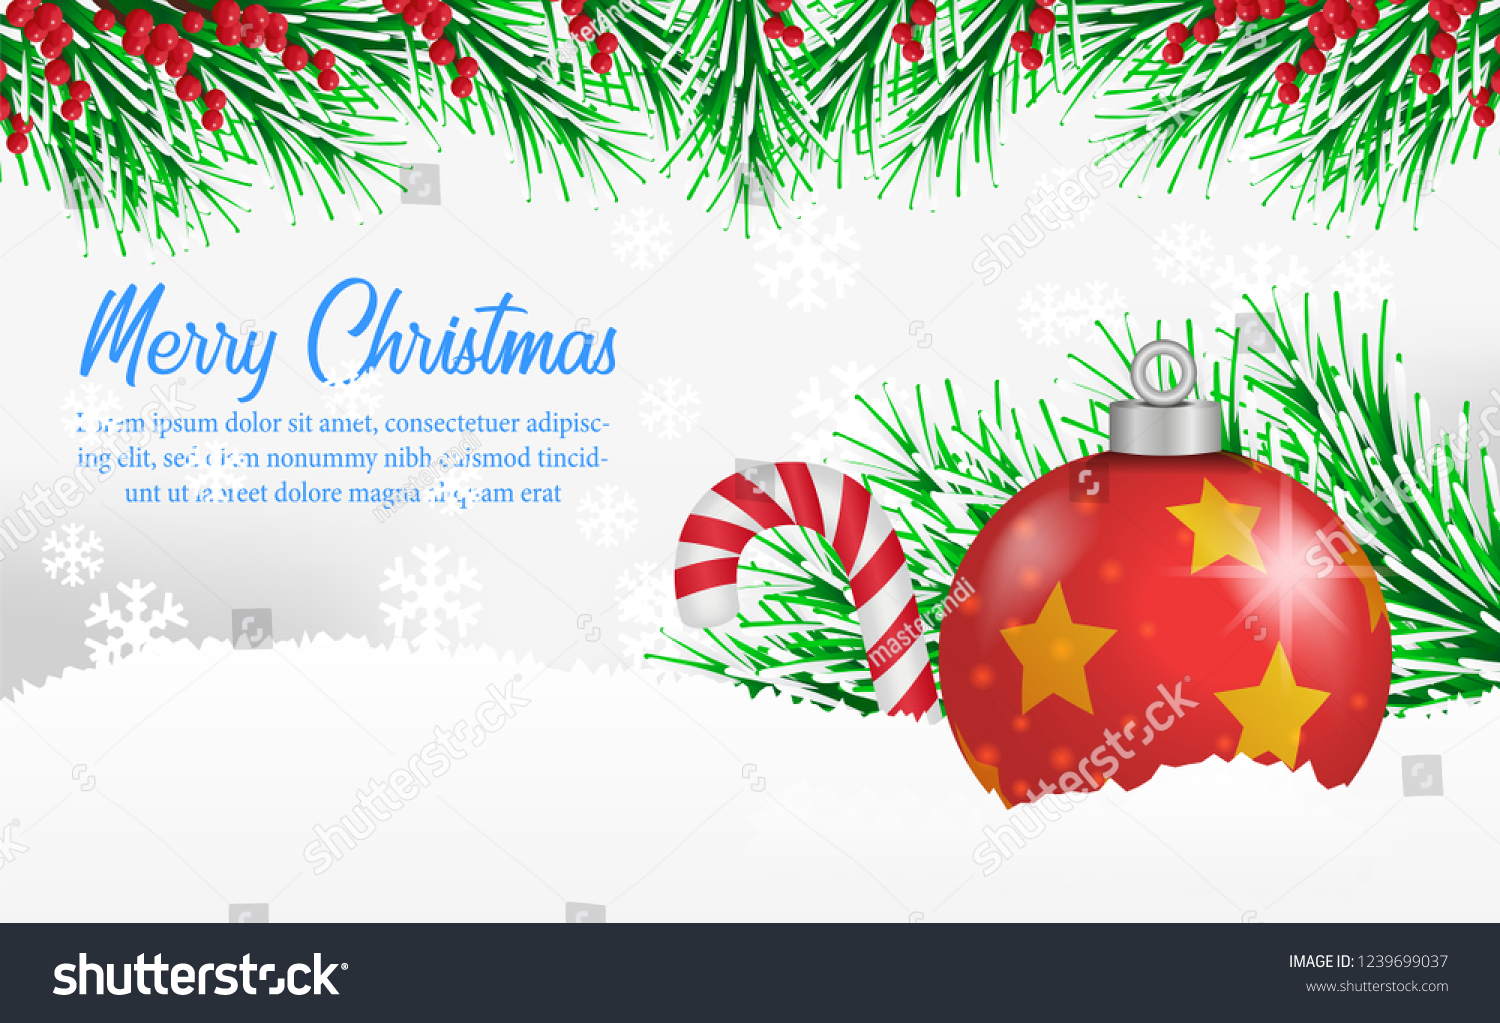 Merry Christmas Banner Template Red Bauble Stock Vector (Royalty Regarding Merry Christmas Banner Template